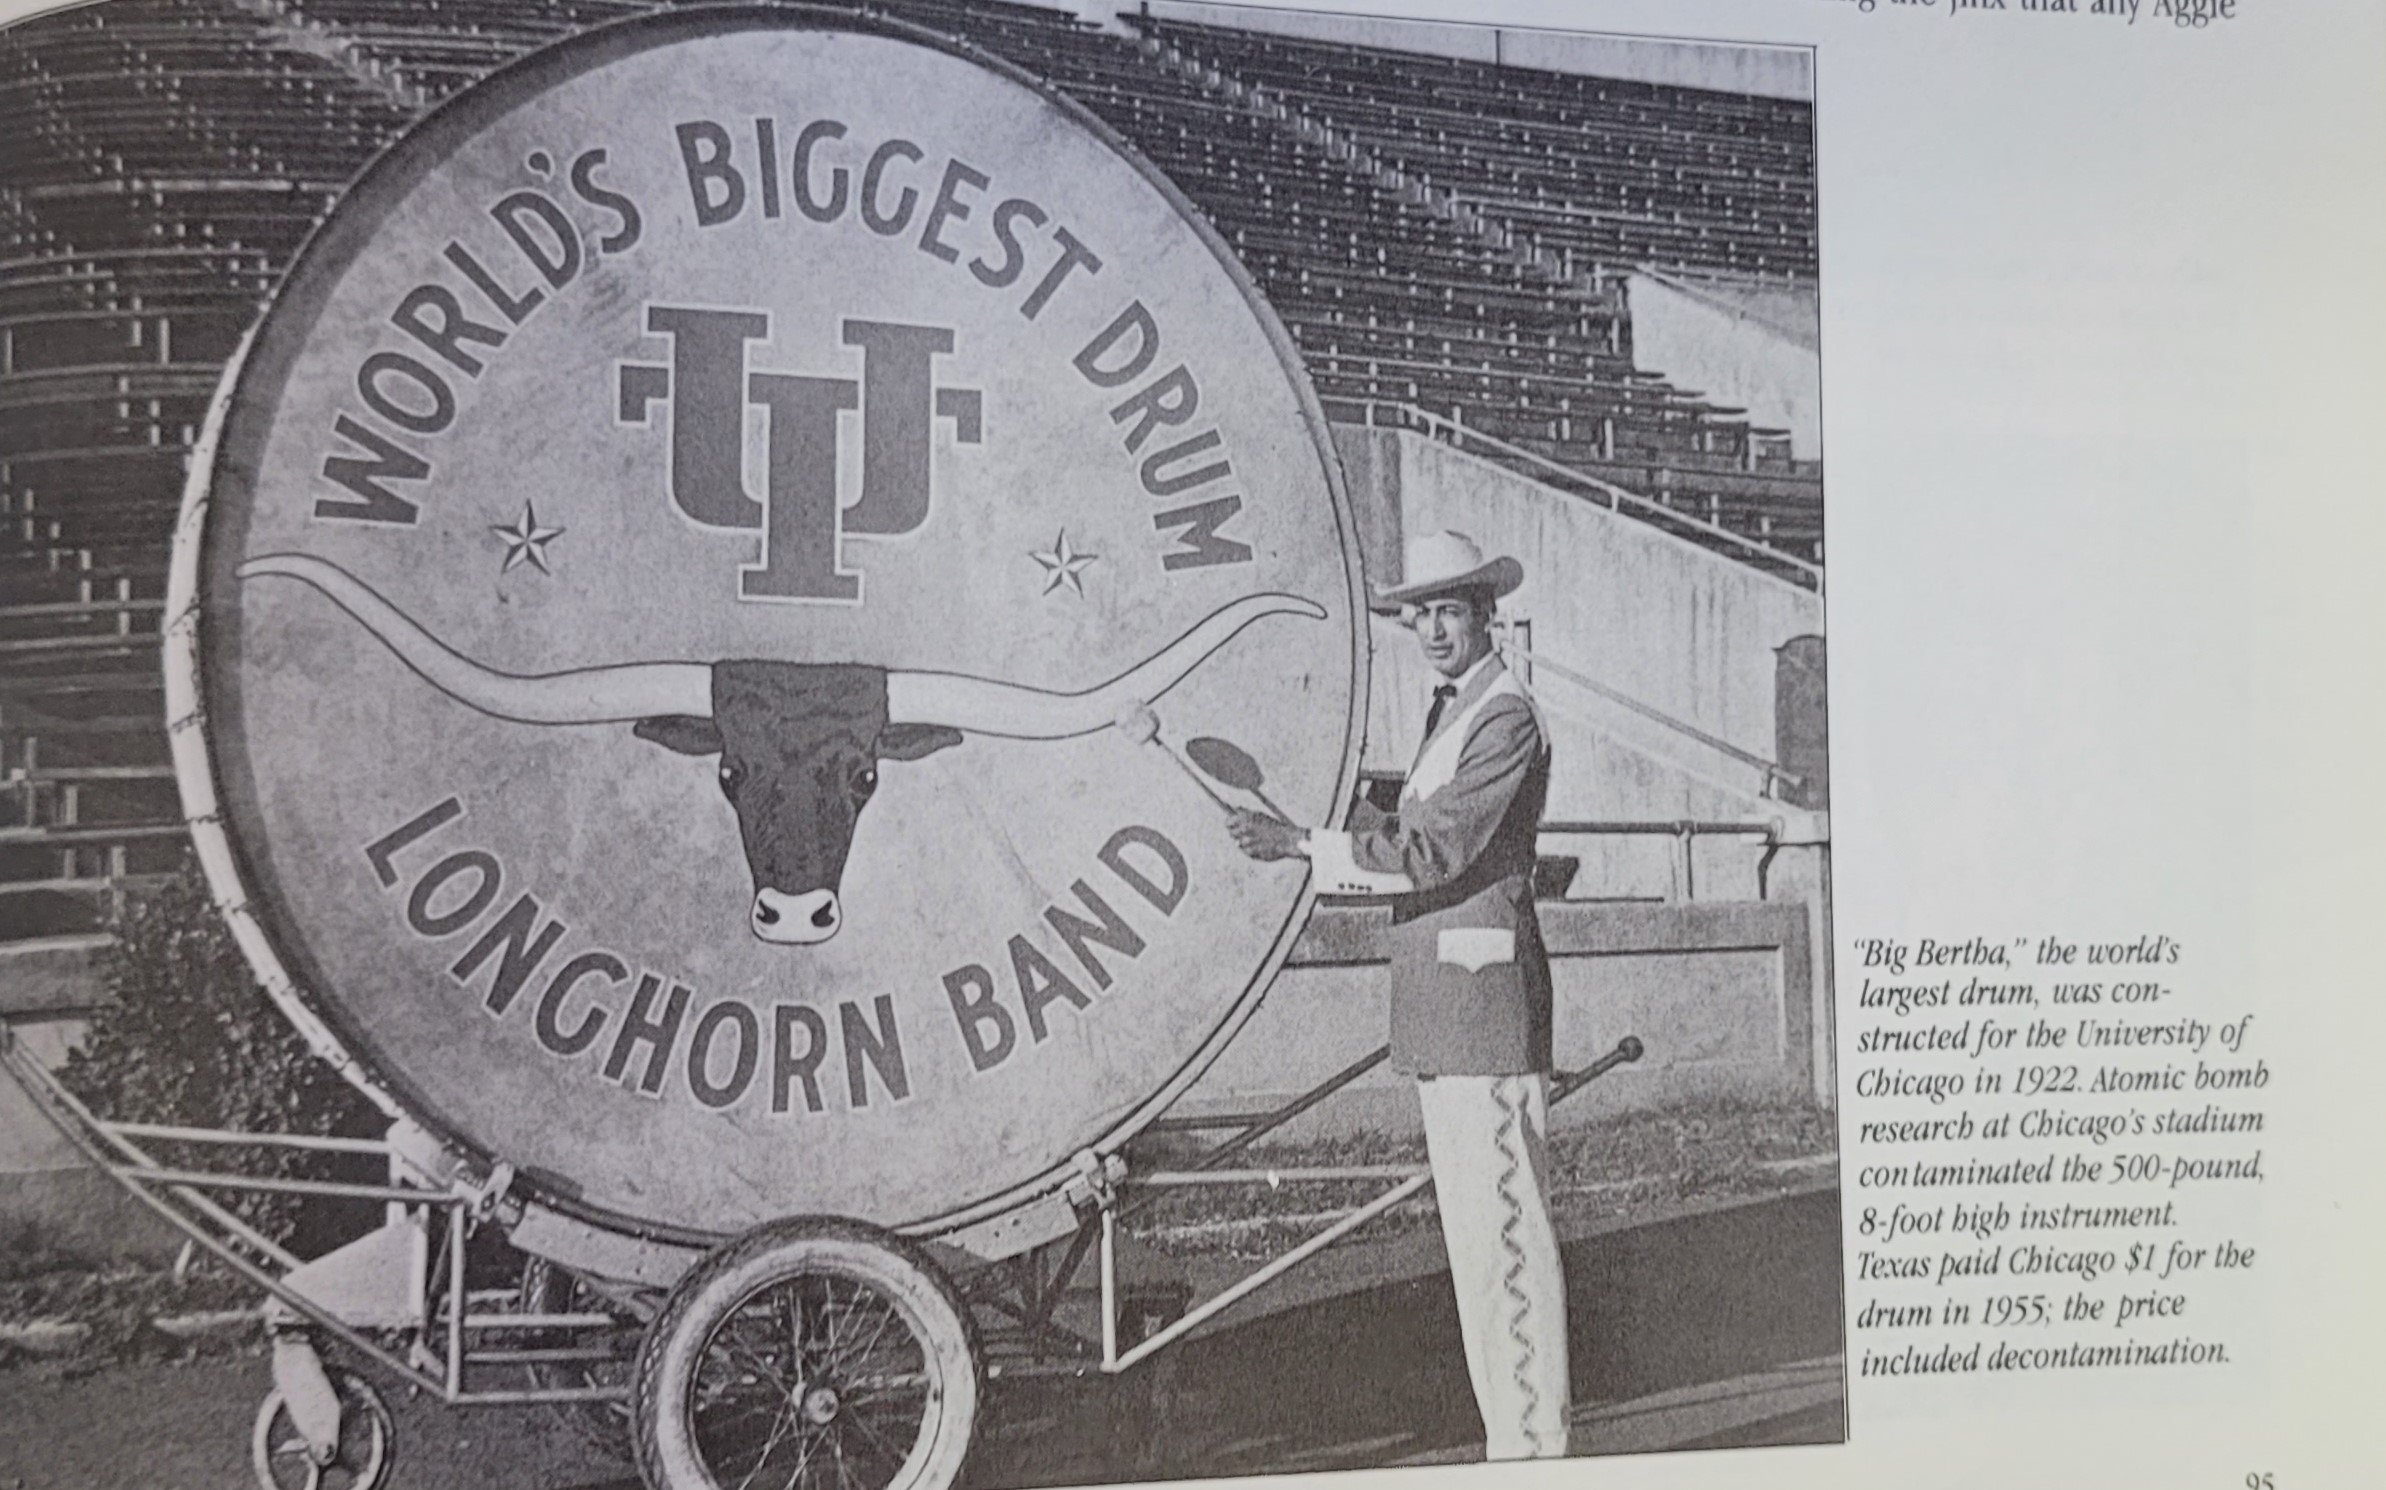  Big Bertha, the world's largest drum, was constructed for the University of Chicago in 1922. Atomic bomb research at Chicago stadium contaminated the 500-pound 8-foot high instrument. Texas paid Chicago $1.00 for the drum in 1955. The price included